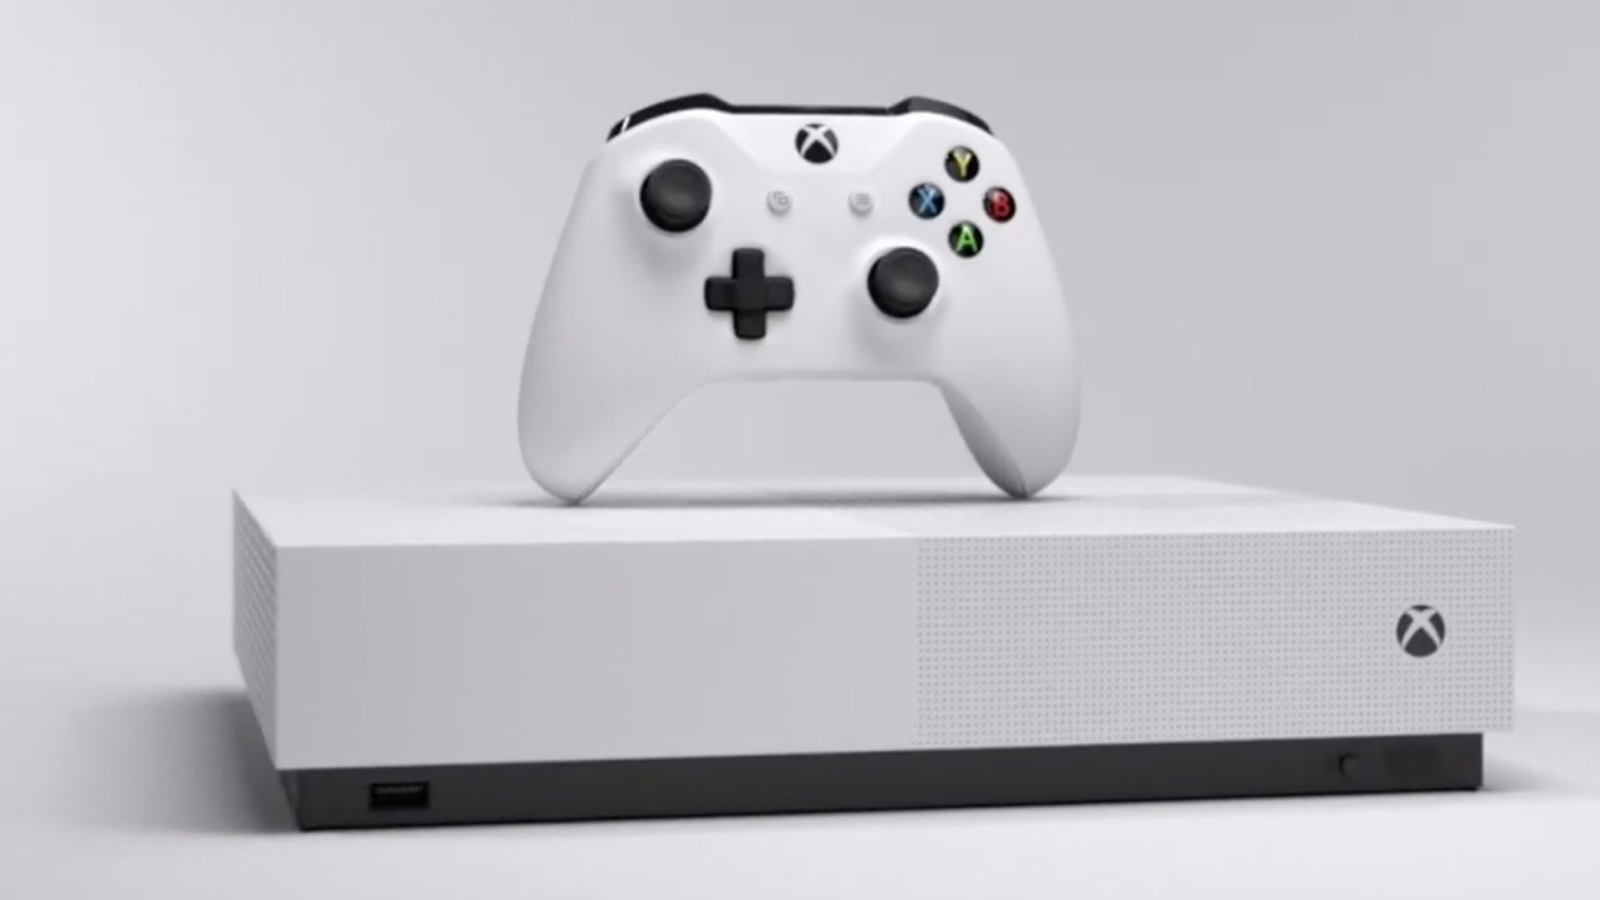 Xbox One S All-Digital Edition: Microsoft reveals new, disc-less